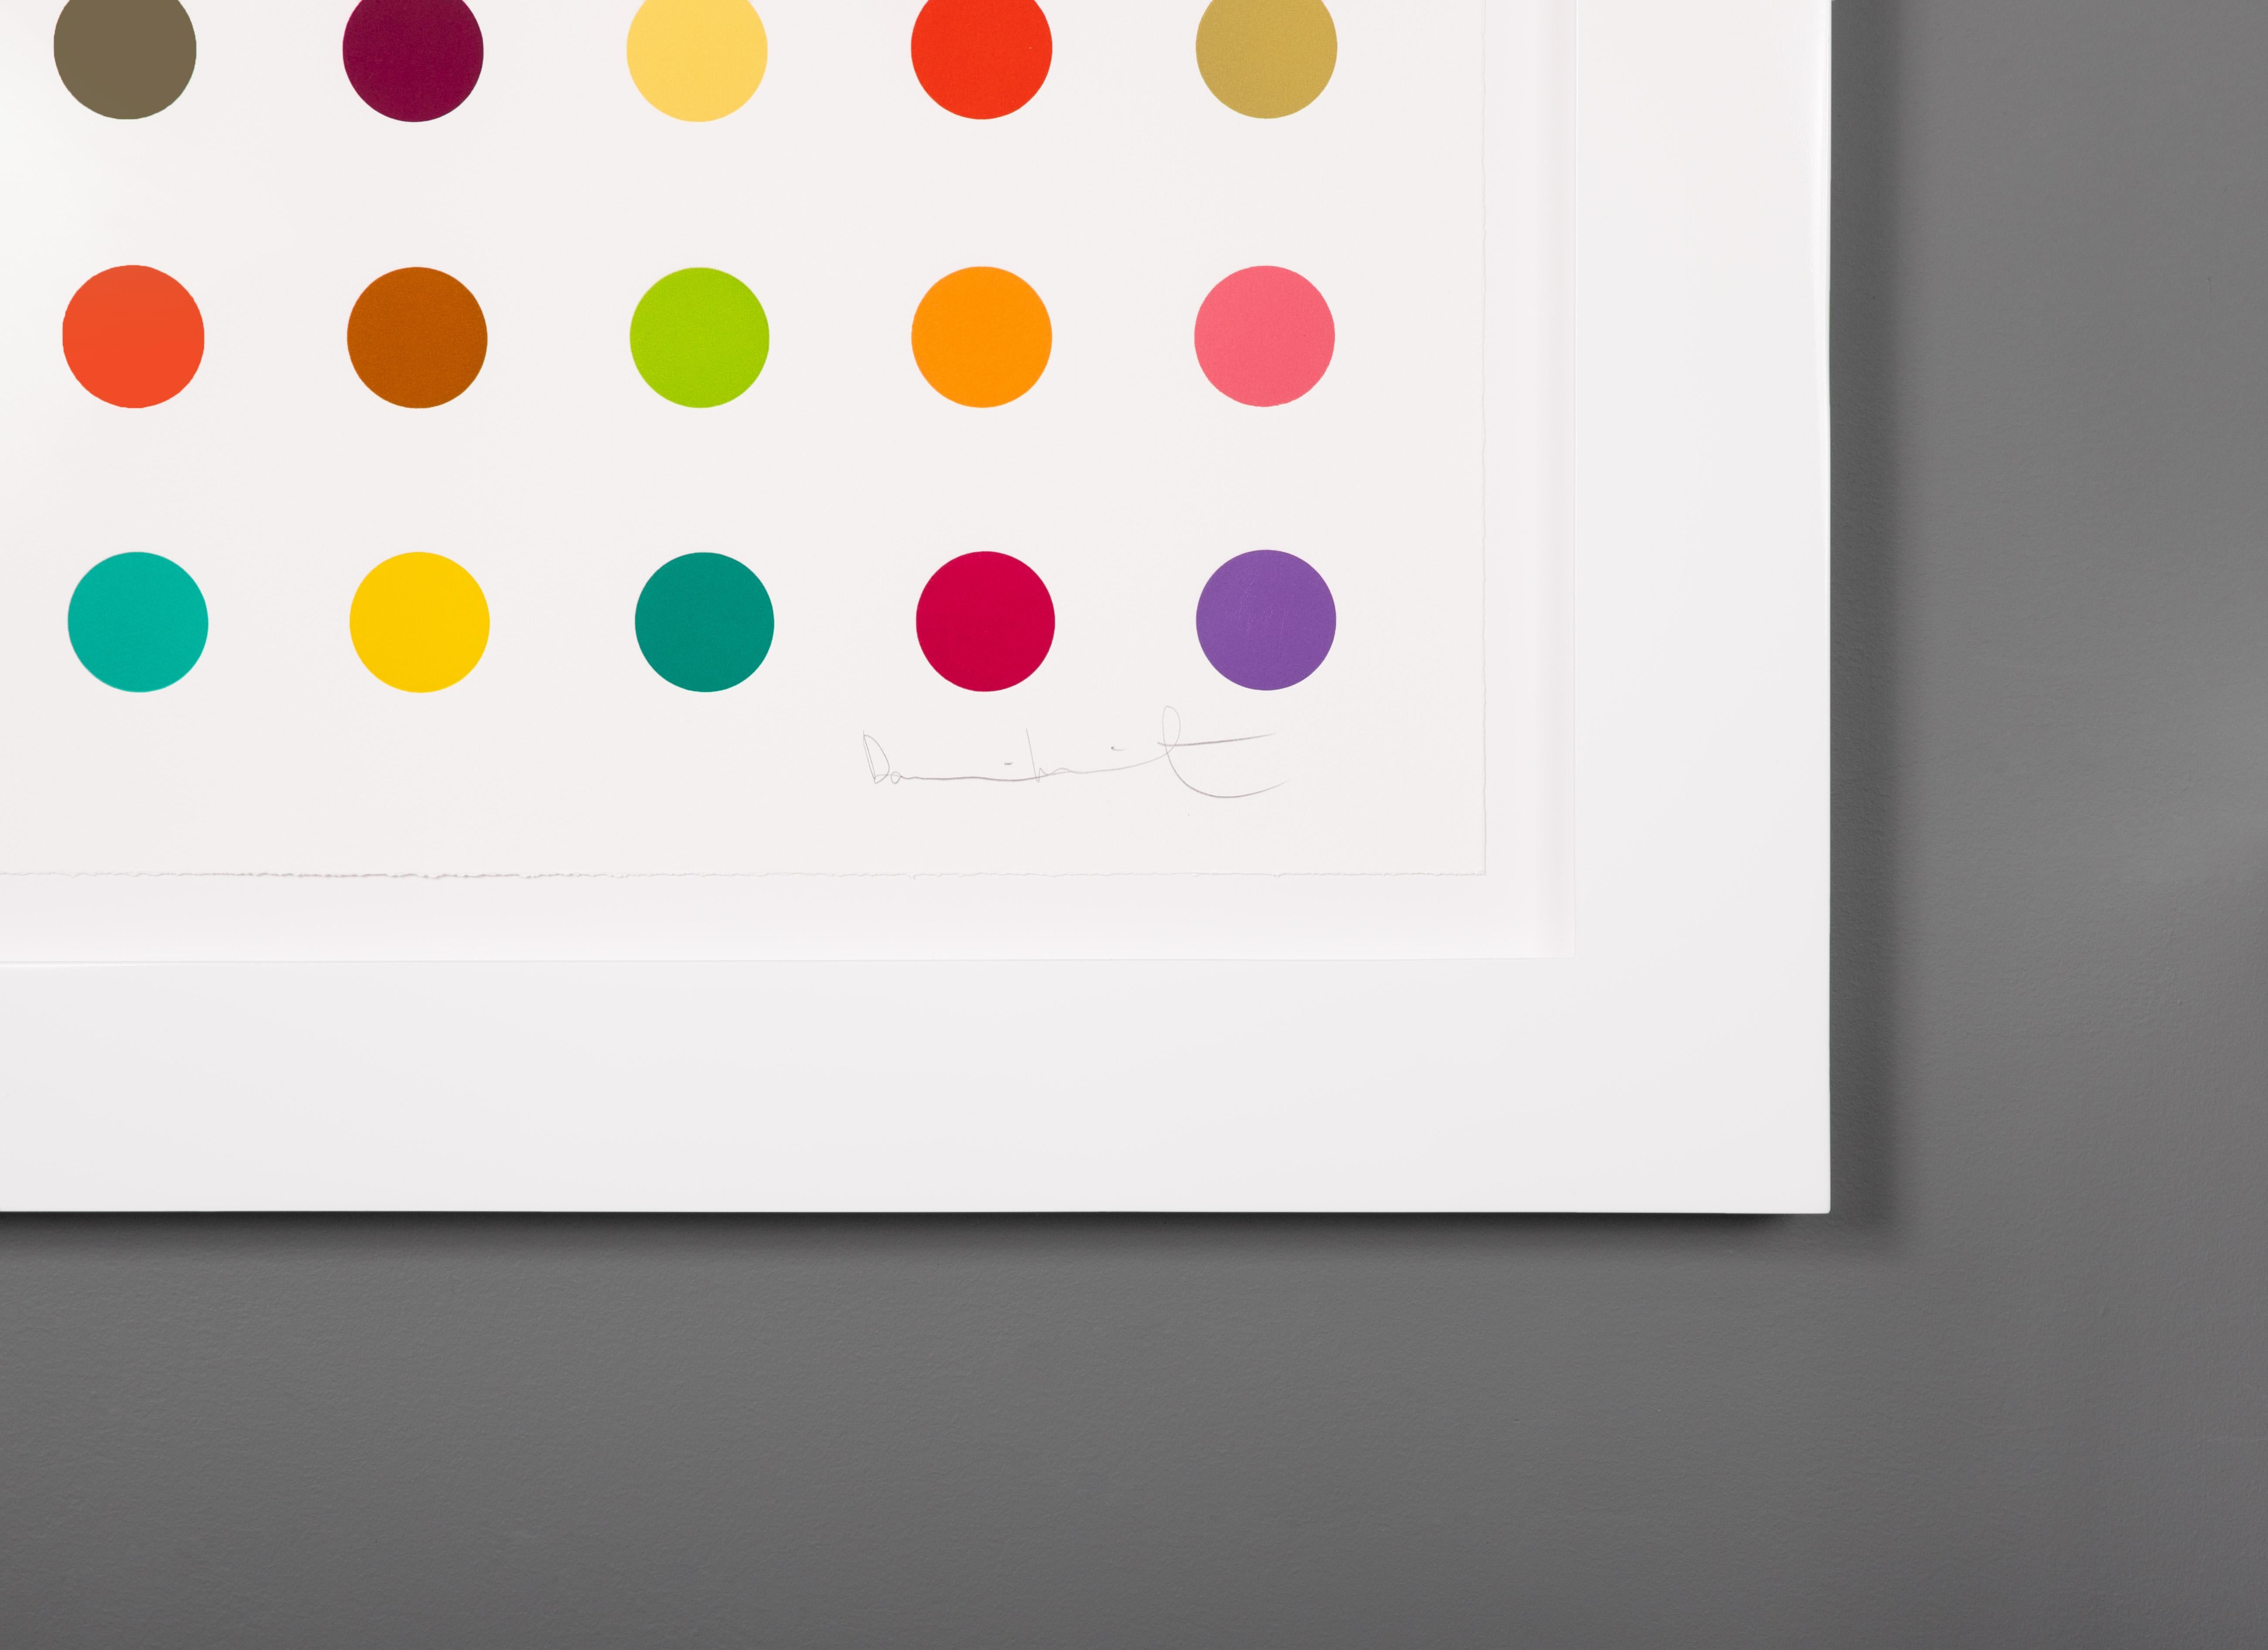 Damien Hirst 'Gly-Gly-Ala' Spots IV Spot Woodcut Print, 2016 For Sale 6